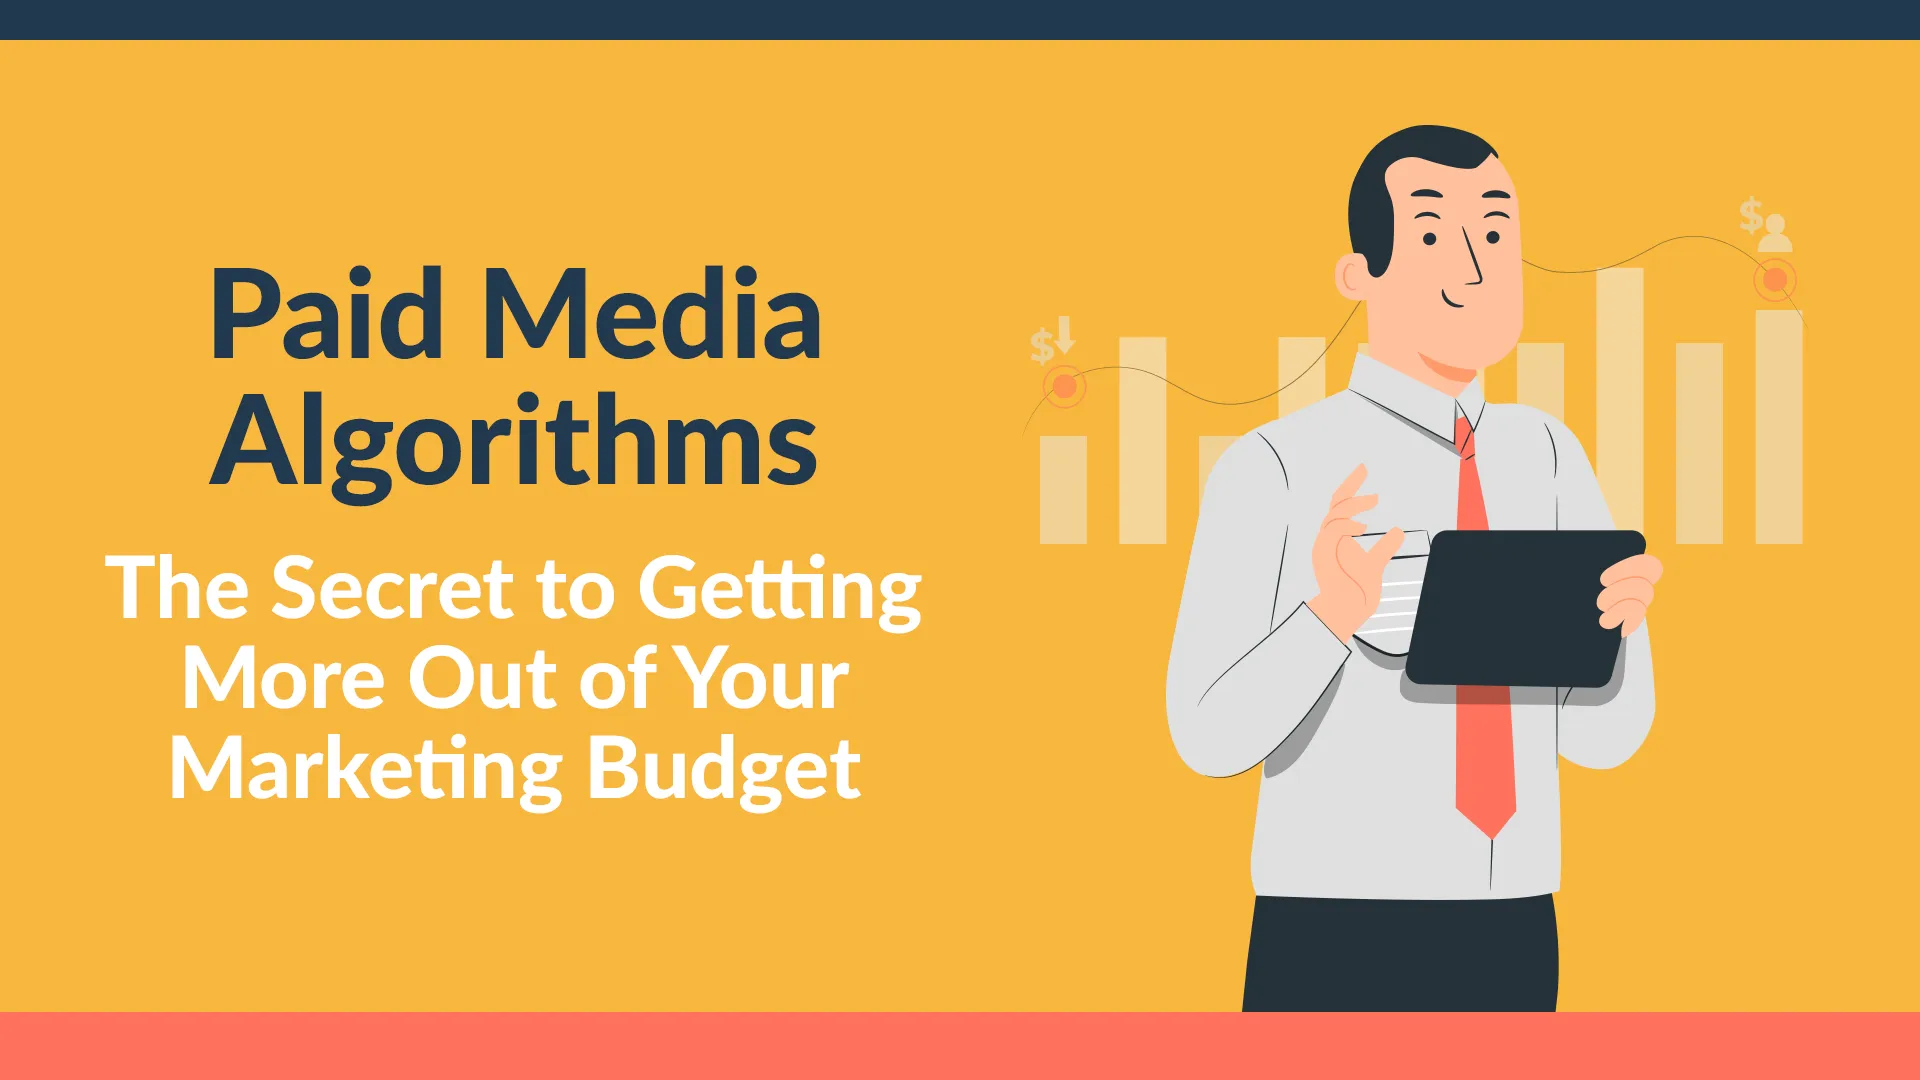 Webinar: Paid Media Algorithms – The Secret to Getting More Out of Your Marketing Budget